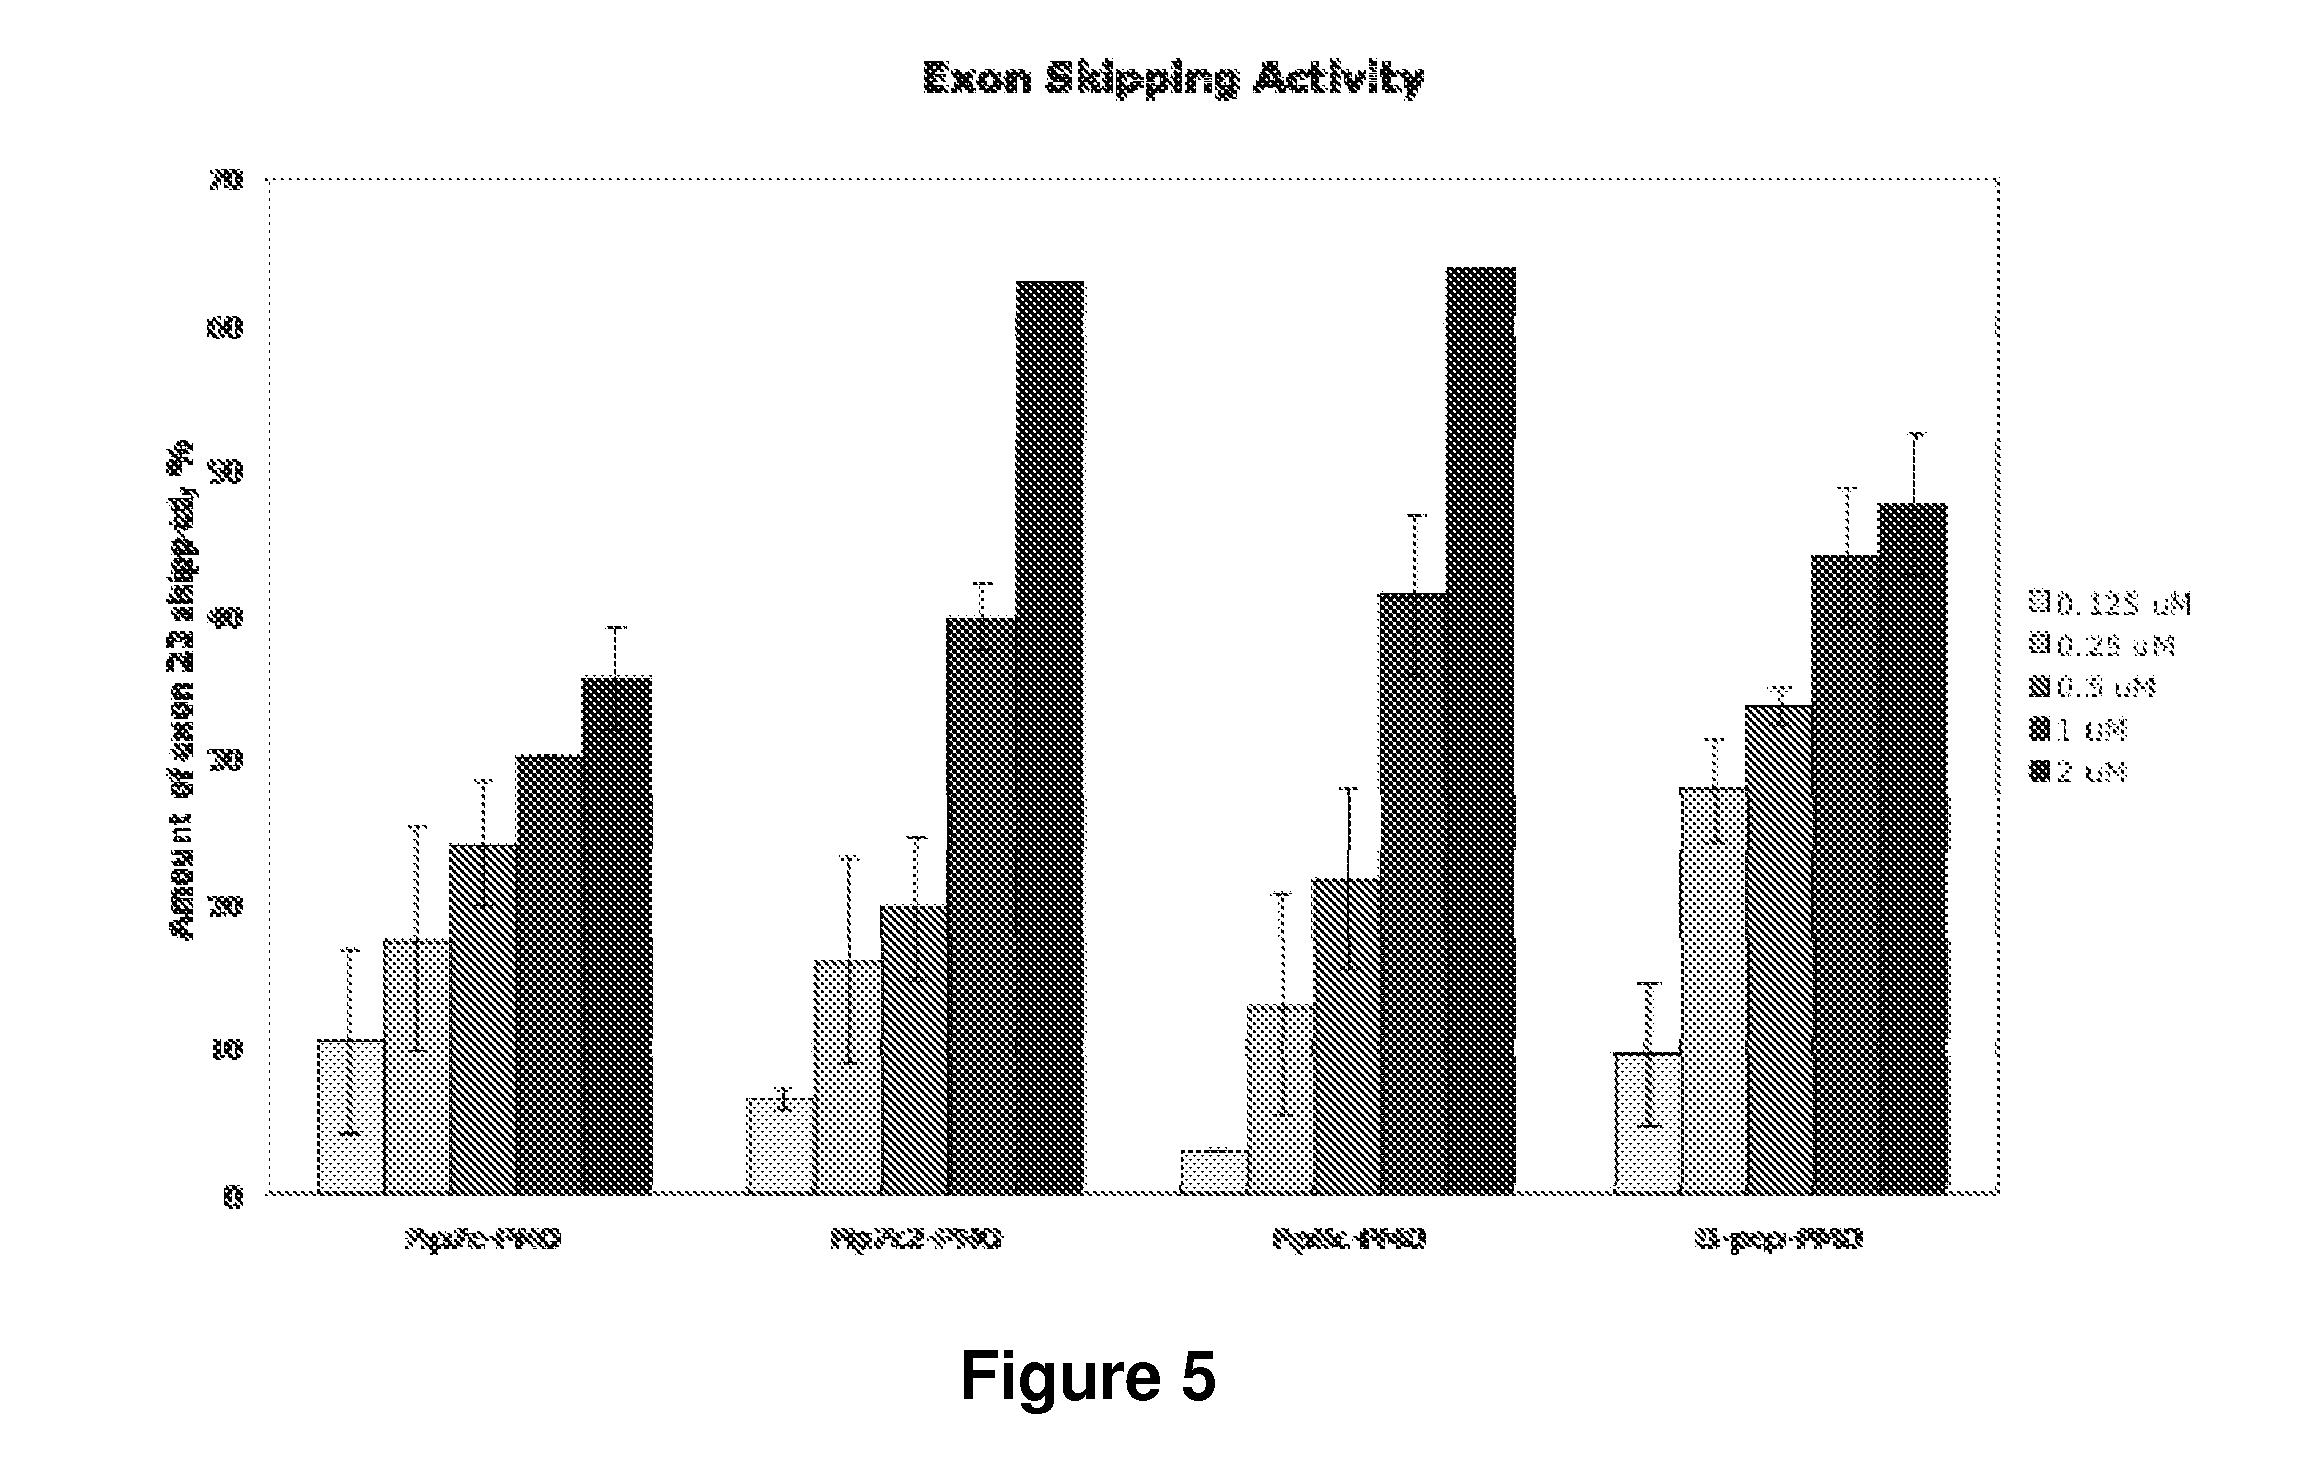 Cell-Penetrating Peptides Having a Central Hydrophobic Domain